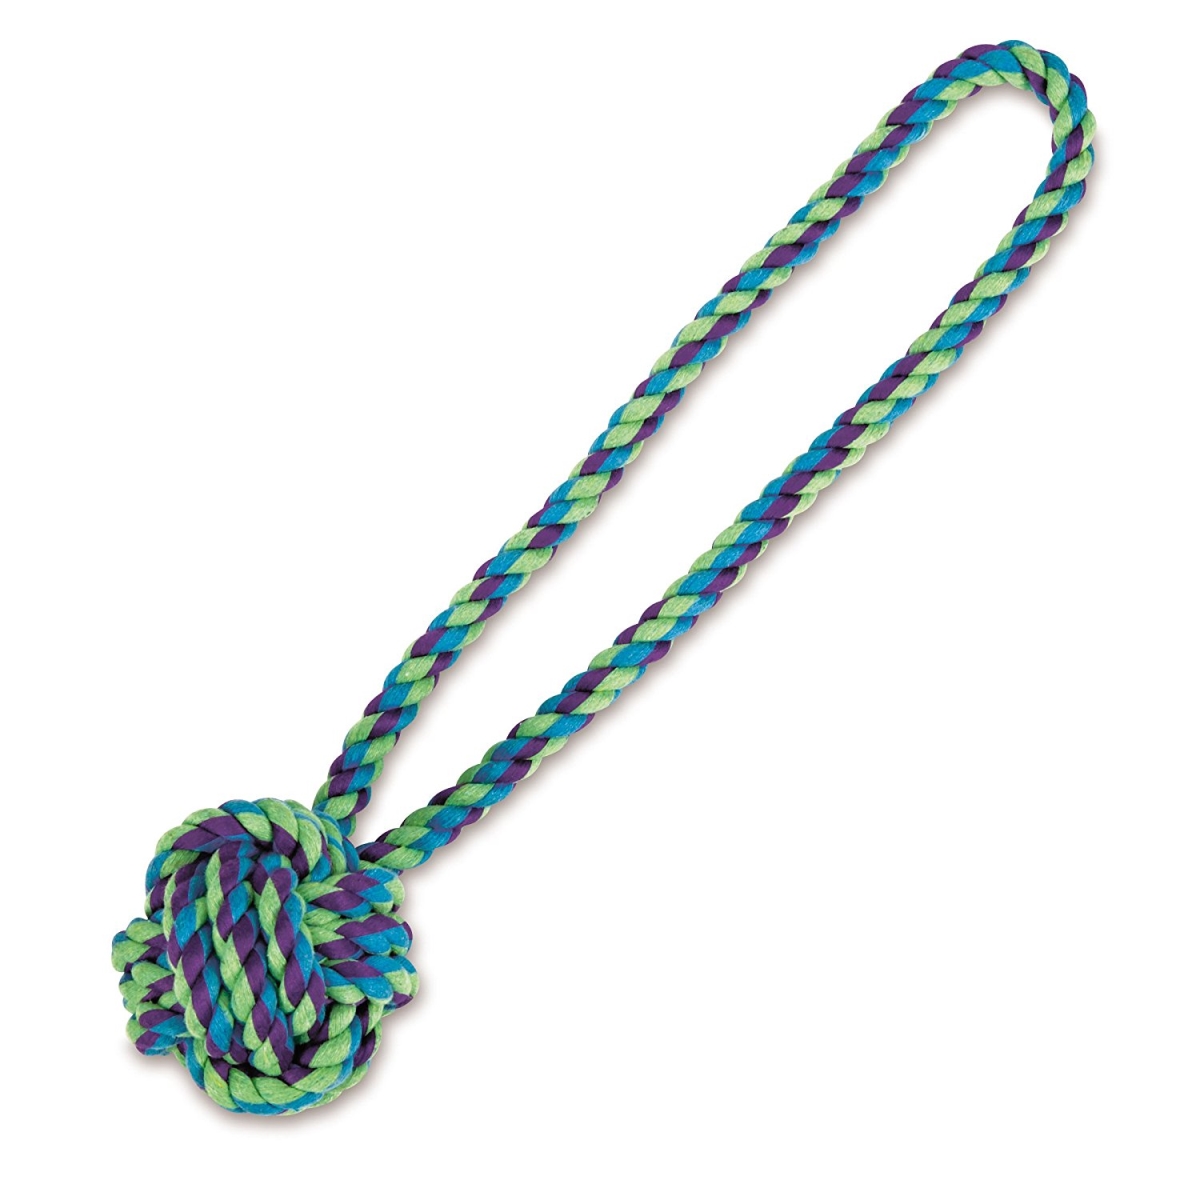 15 In. Monkeys Fist Knot Rope Toy - Blue & Green